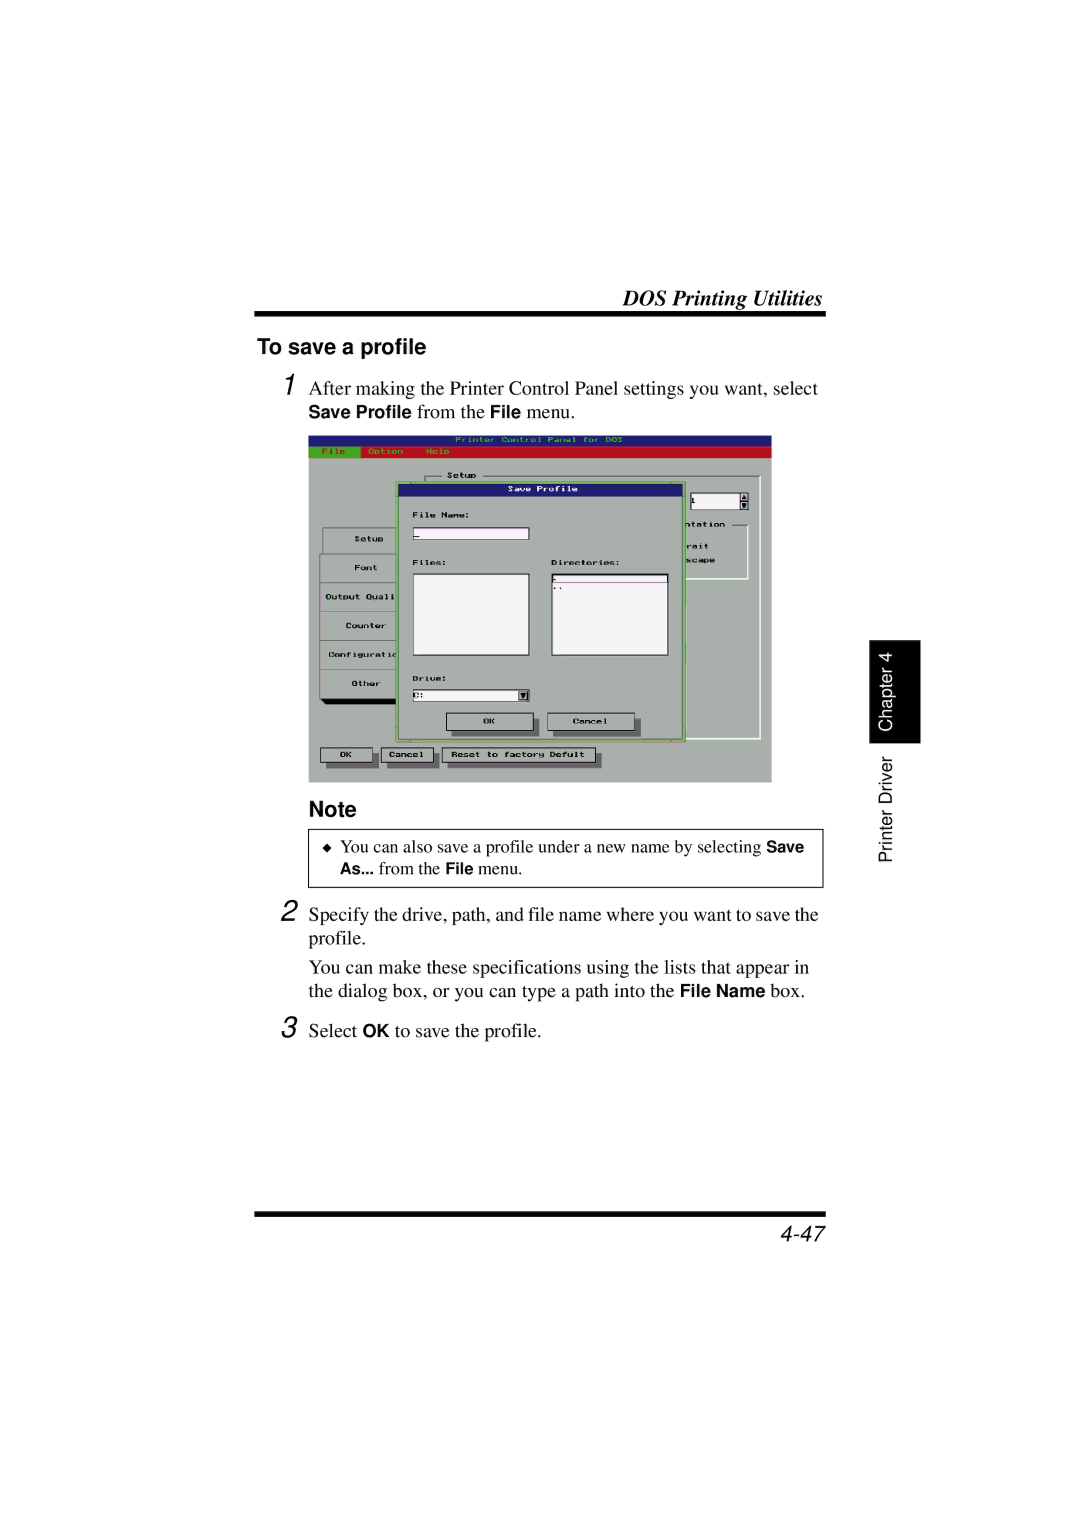 NEC 1100 user manual To save a profile, Save Profile from the File menu 